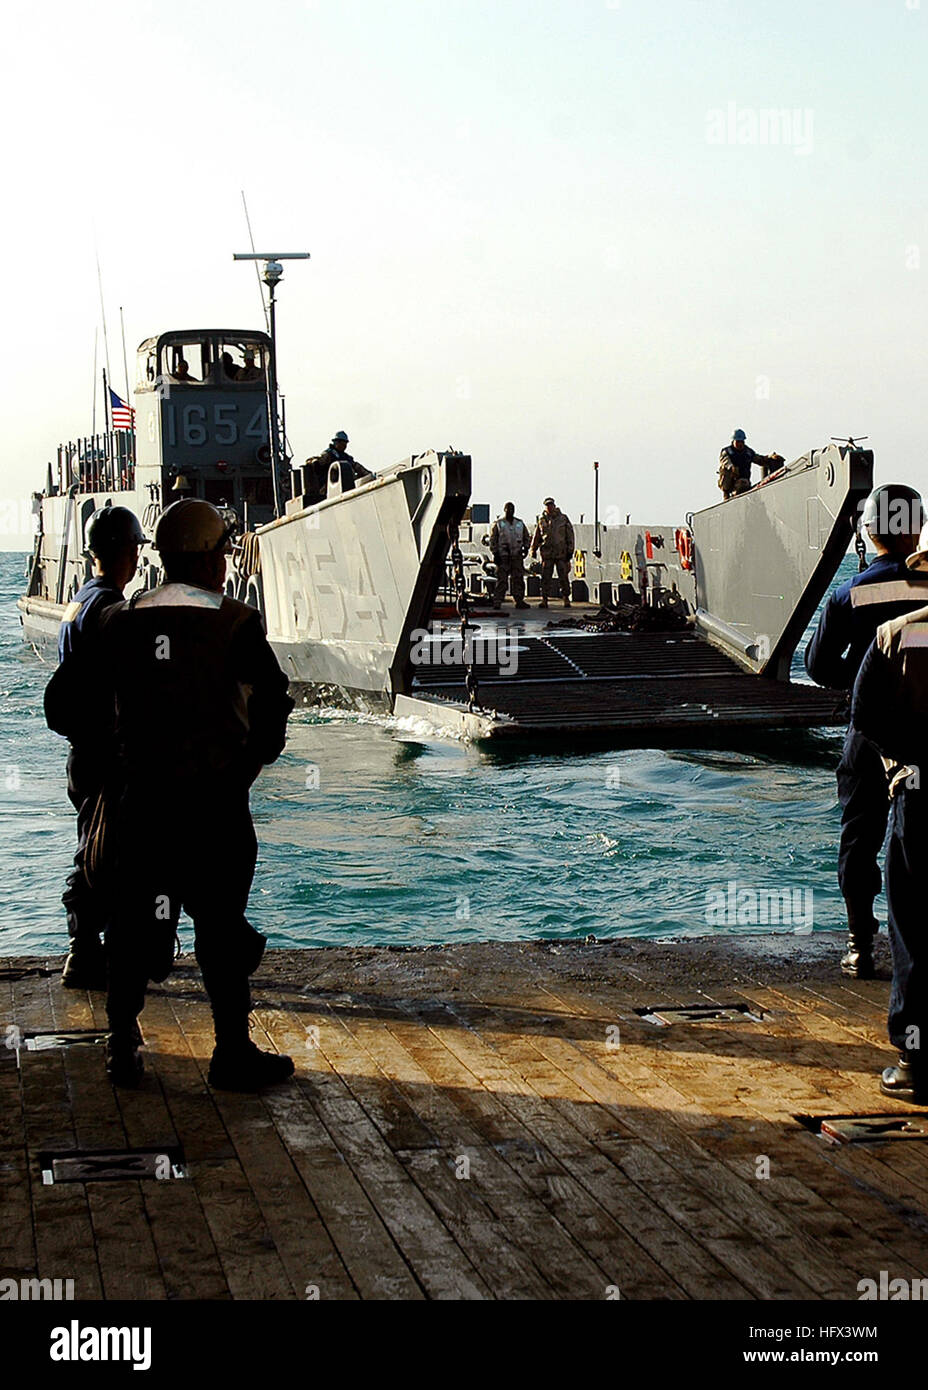 090107-N-5681S-056 PERSIAN GULF (Jan. 7, 2009) Sailors conduct well deck operations with a landing craft utility from Assault Craft Unit (ACU) 2 aboard the multi-purpose amphibious assault ship USS Iwo Jima (LHD 7). Iwo Jima is deployed as part of the Iwo Jima Expeditionary Strike Group supporting maritime security operations in the U.S. 5th Fleet area of responsibility. (U.S. Navy photo by Mass Communication Specialist 2nd Class Michael Starkey/Released) USS LCU-1654 090107-N-5681S-056 Stock Photo